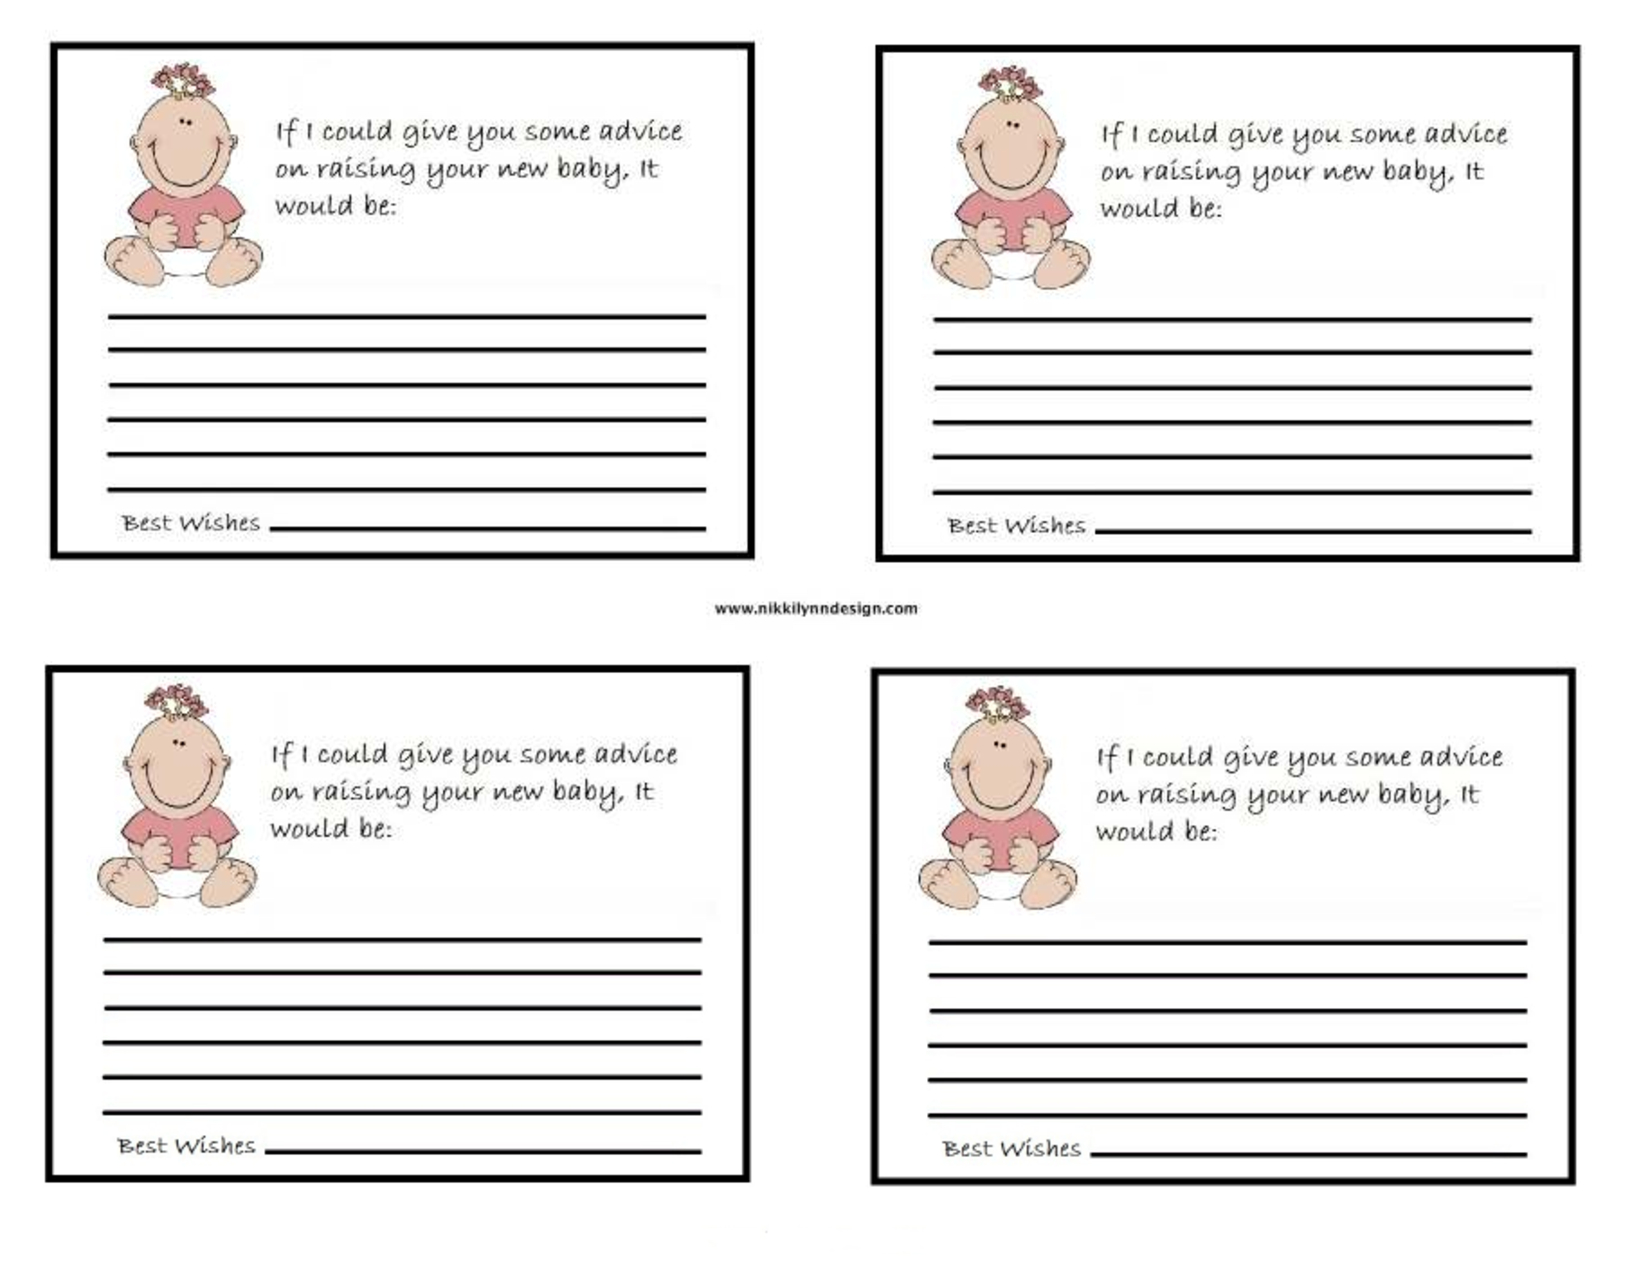 Baby Shower Games Free Printable Worksheets. Free Printable Baby - Free Printable Baby Shower Games For Twins